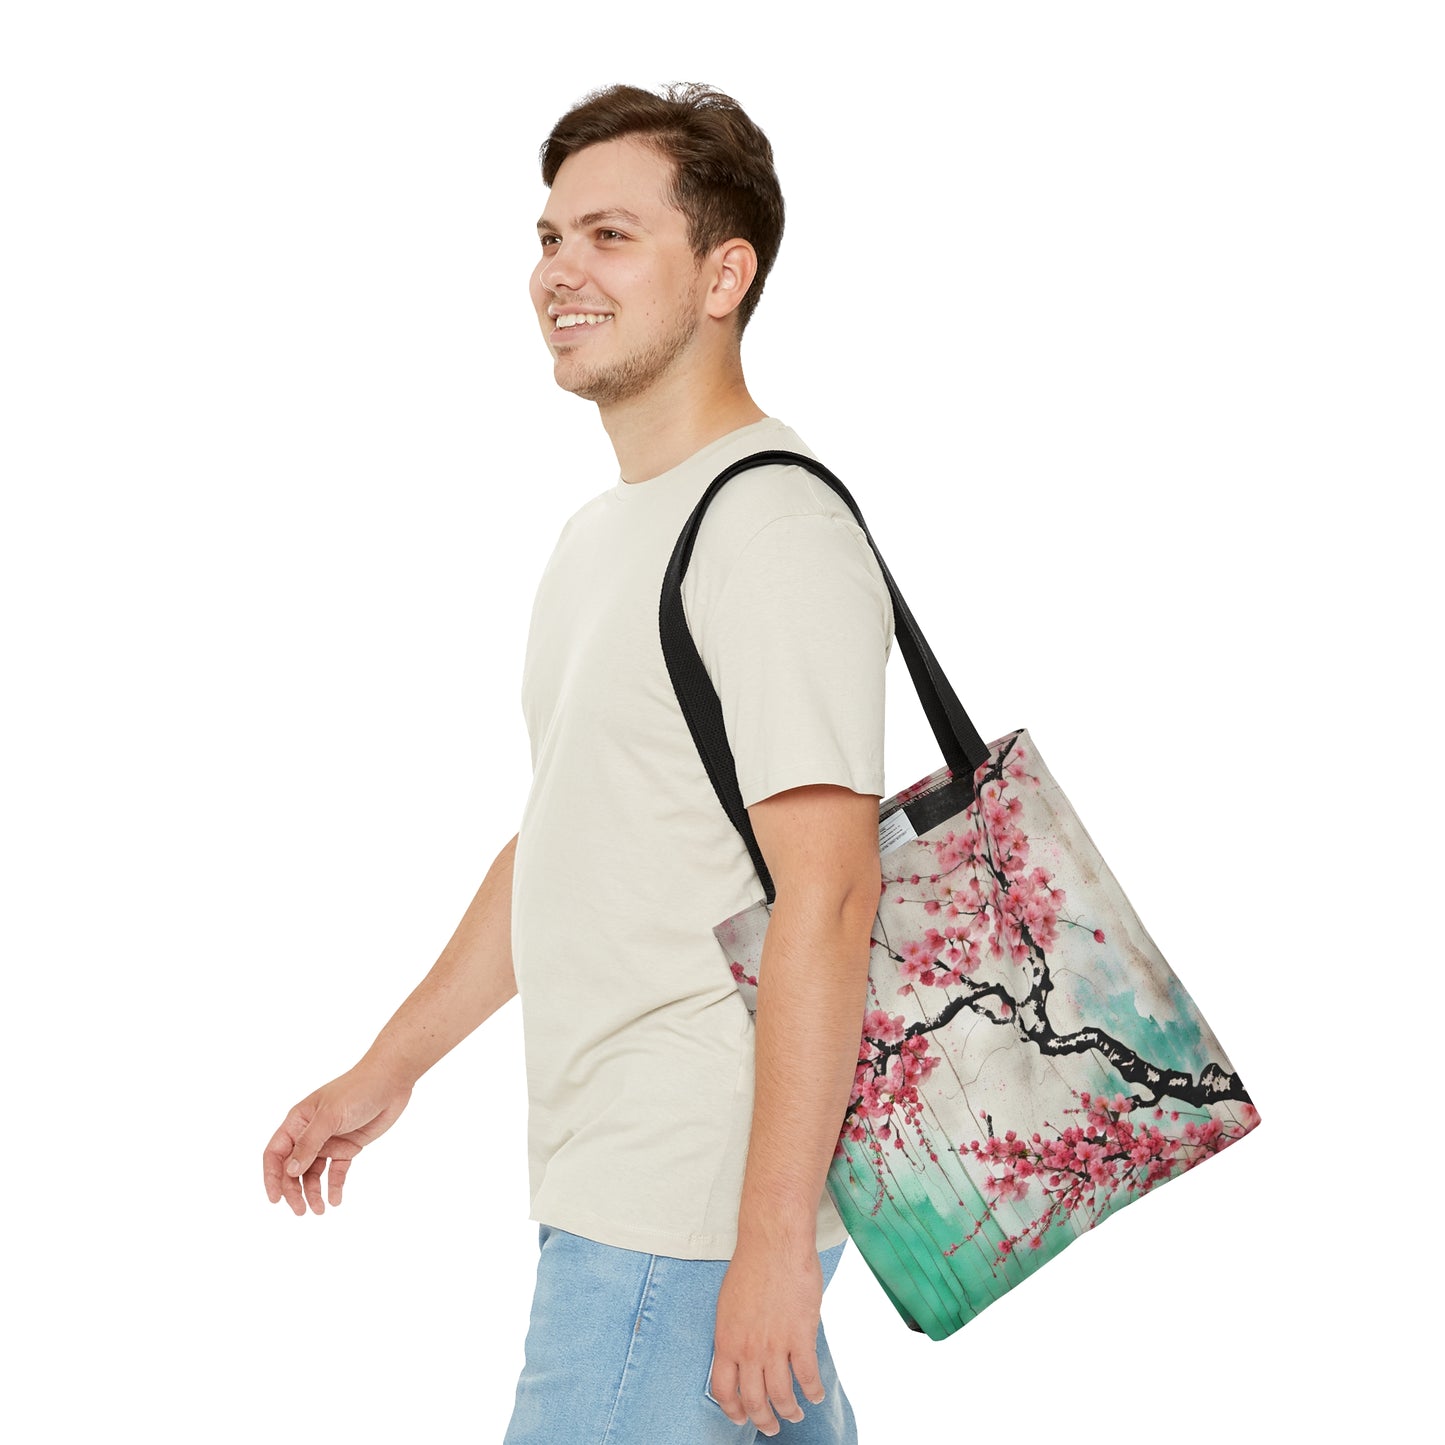 Floral Themed Bags and Travel Accessories - Street Style Cherry Blossoms Printed on Tote Bag small